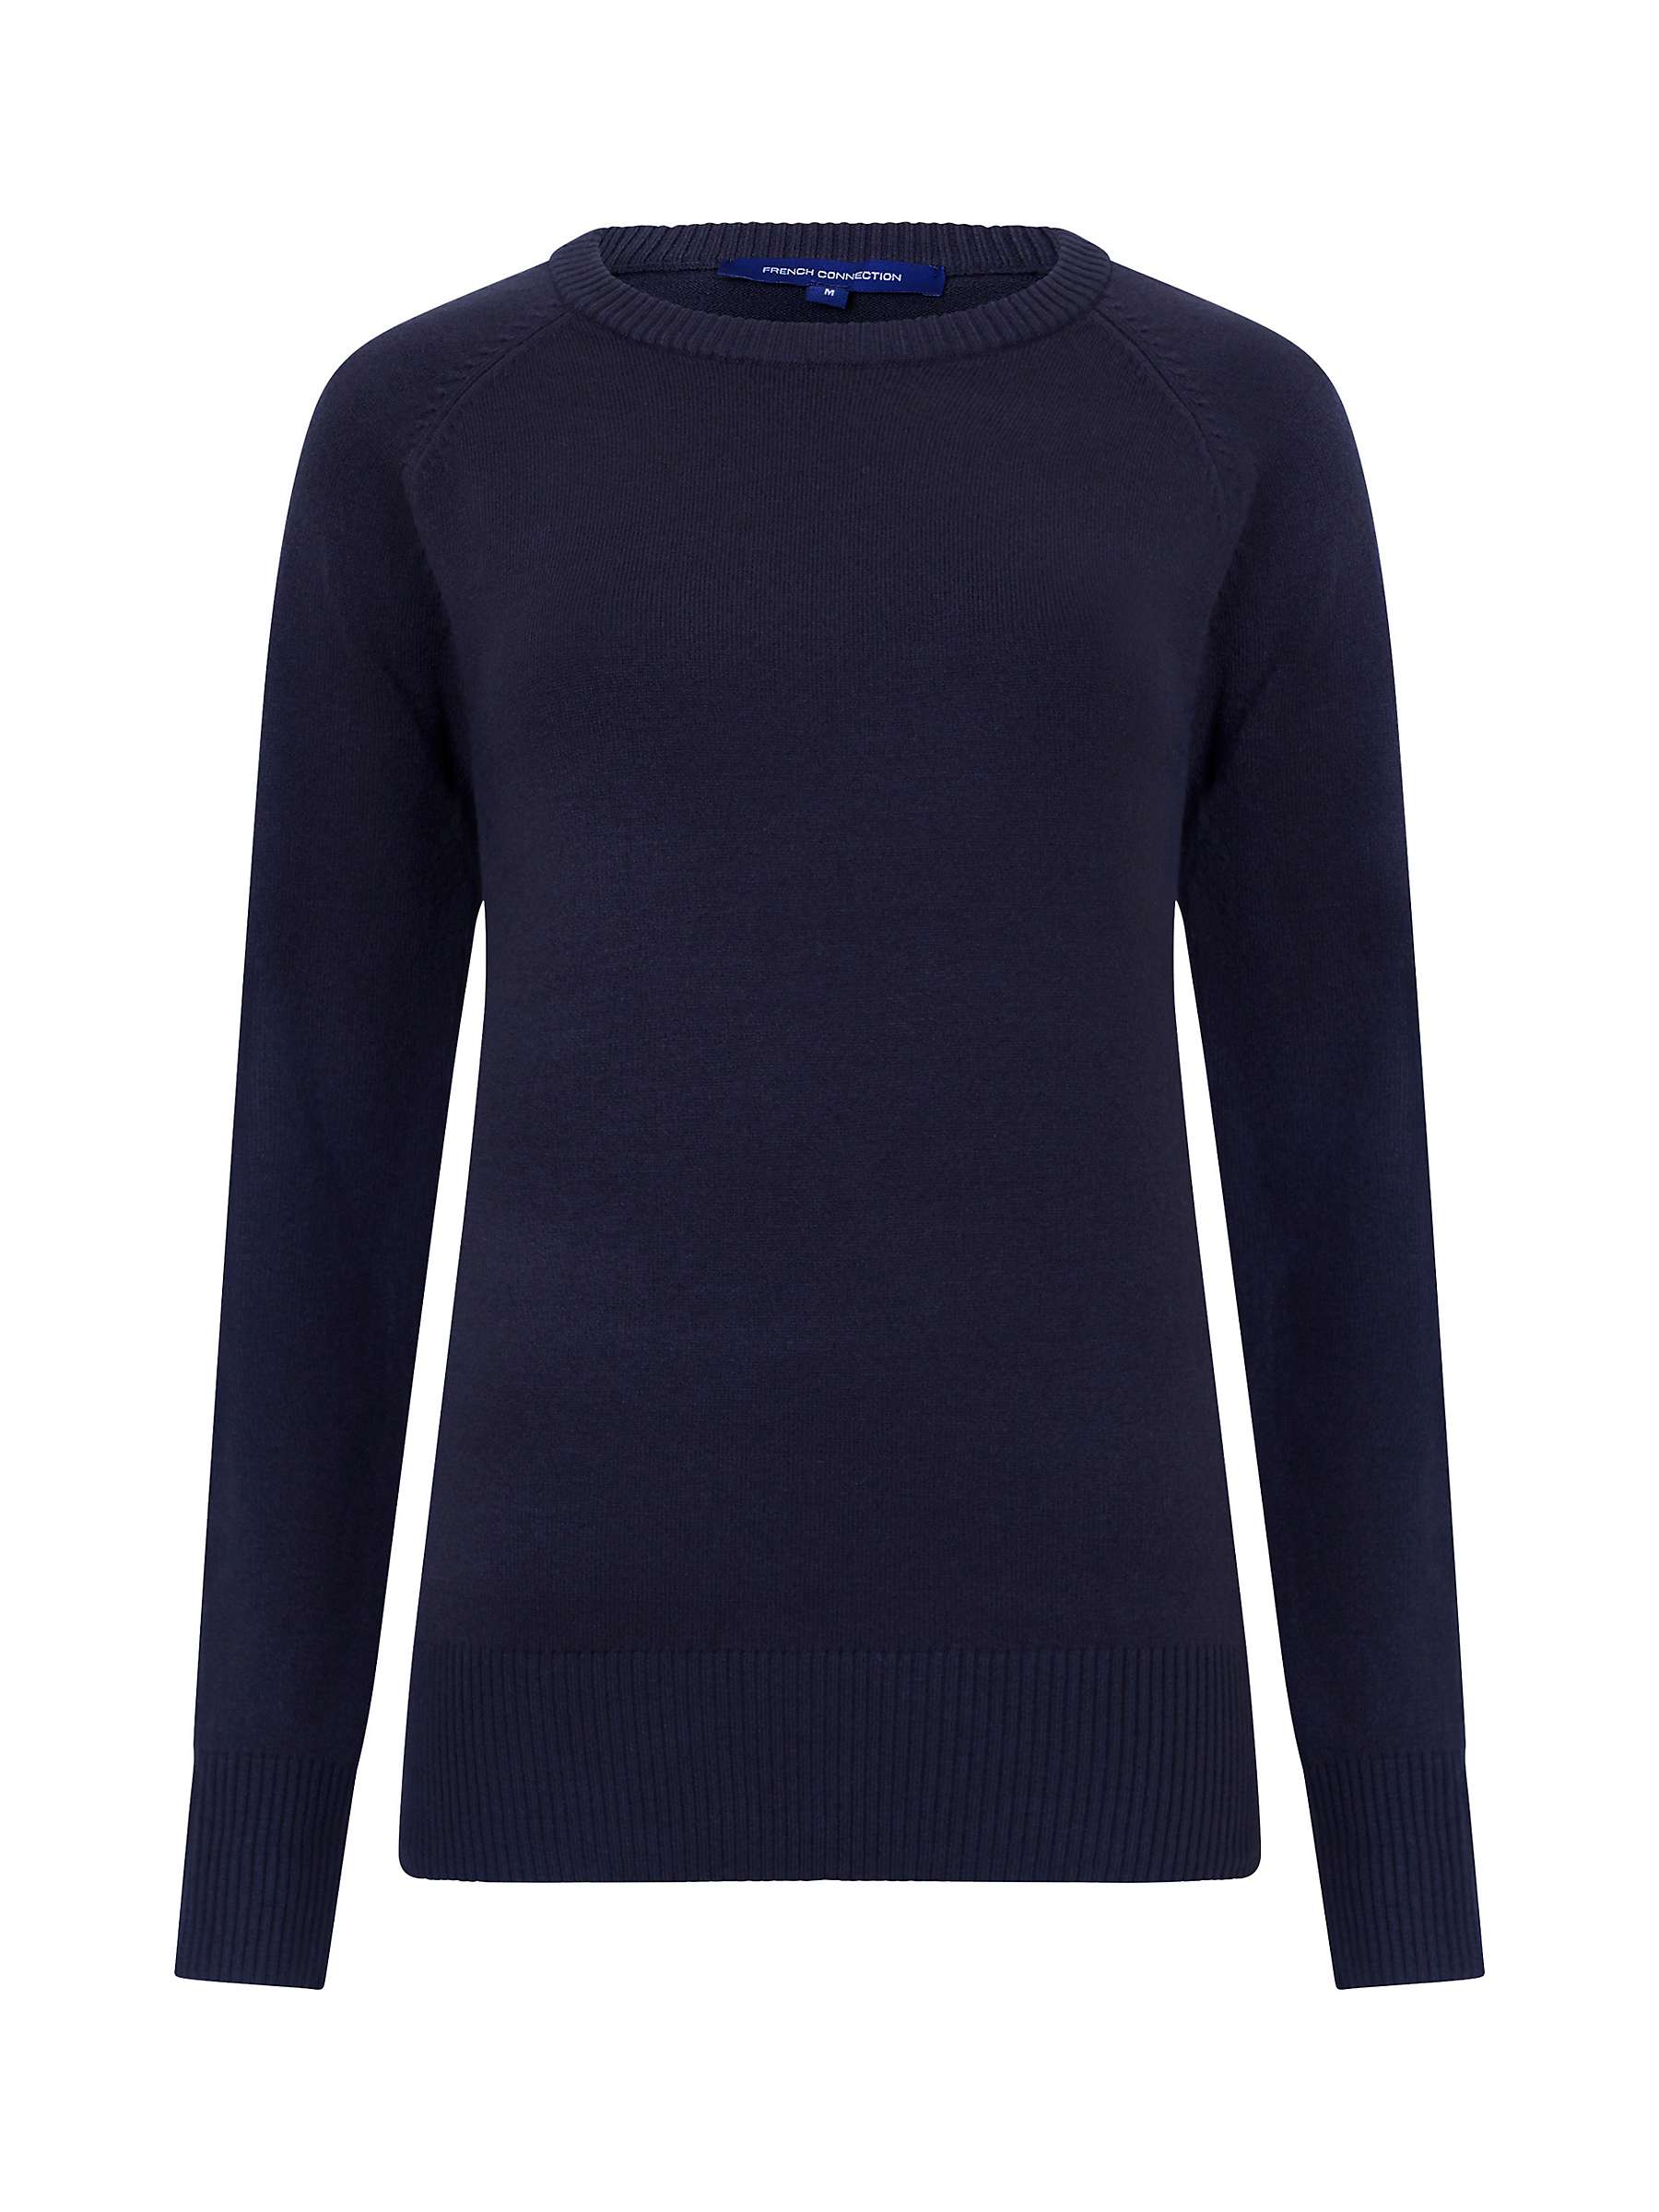 French Connection Babysoft Jumper, Navy at John Lewis & Partners